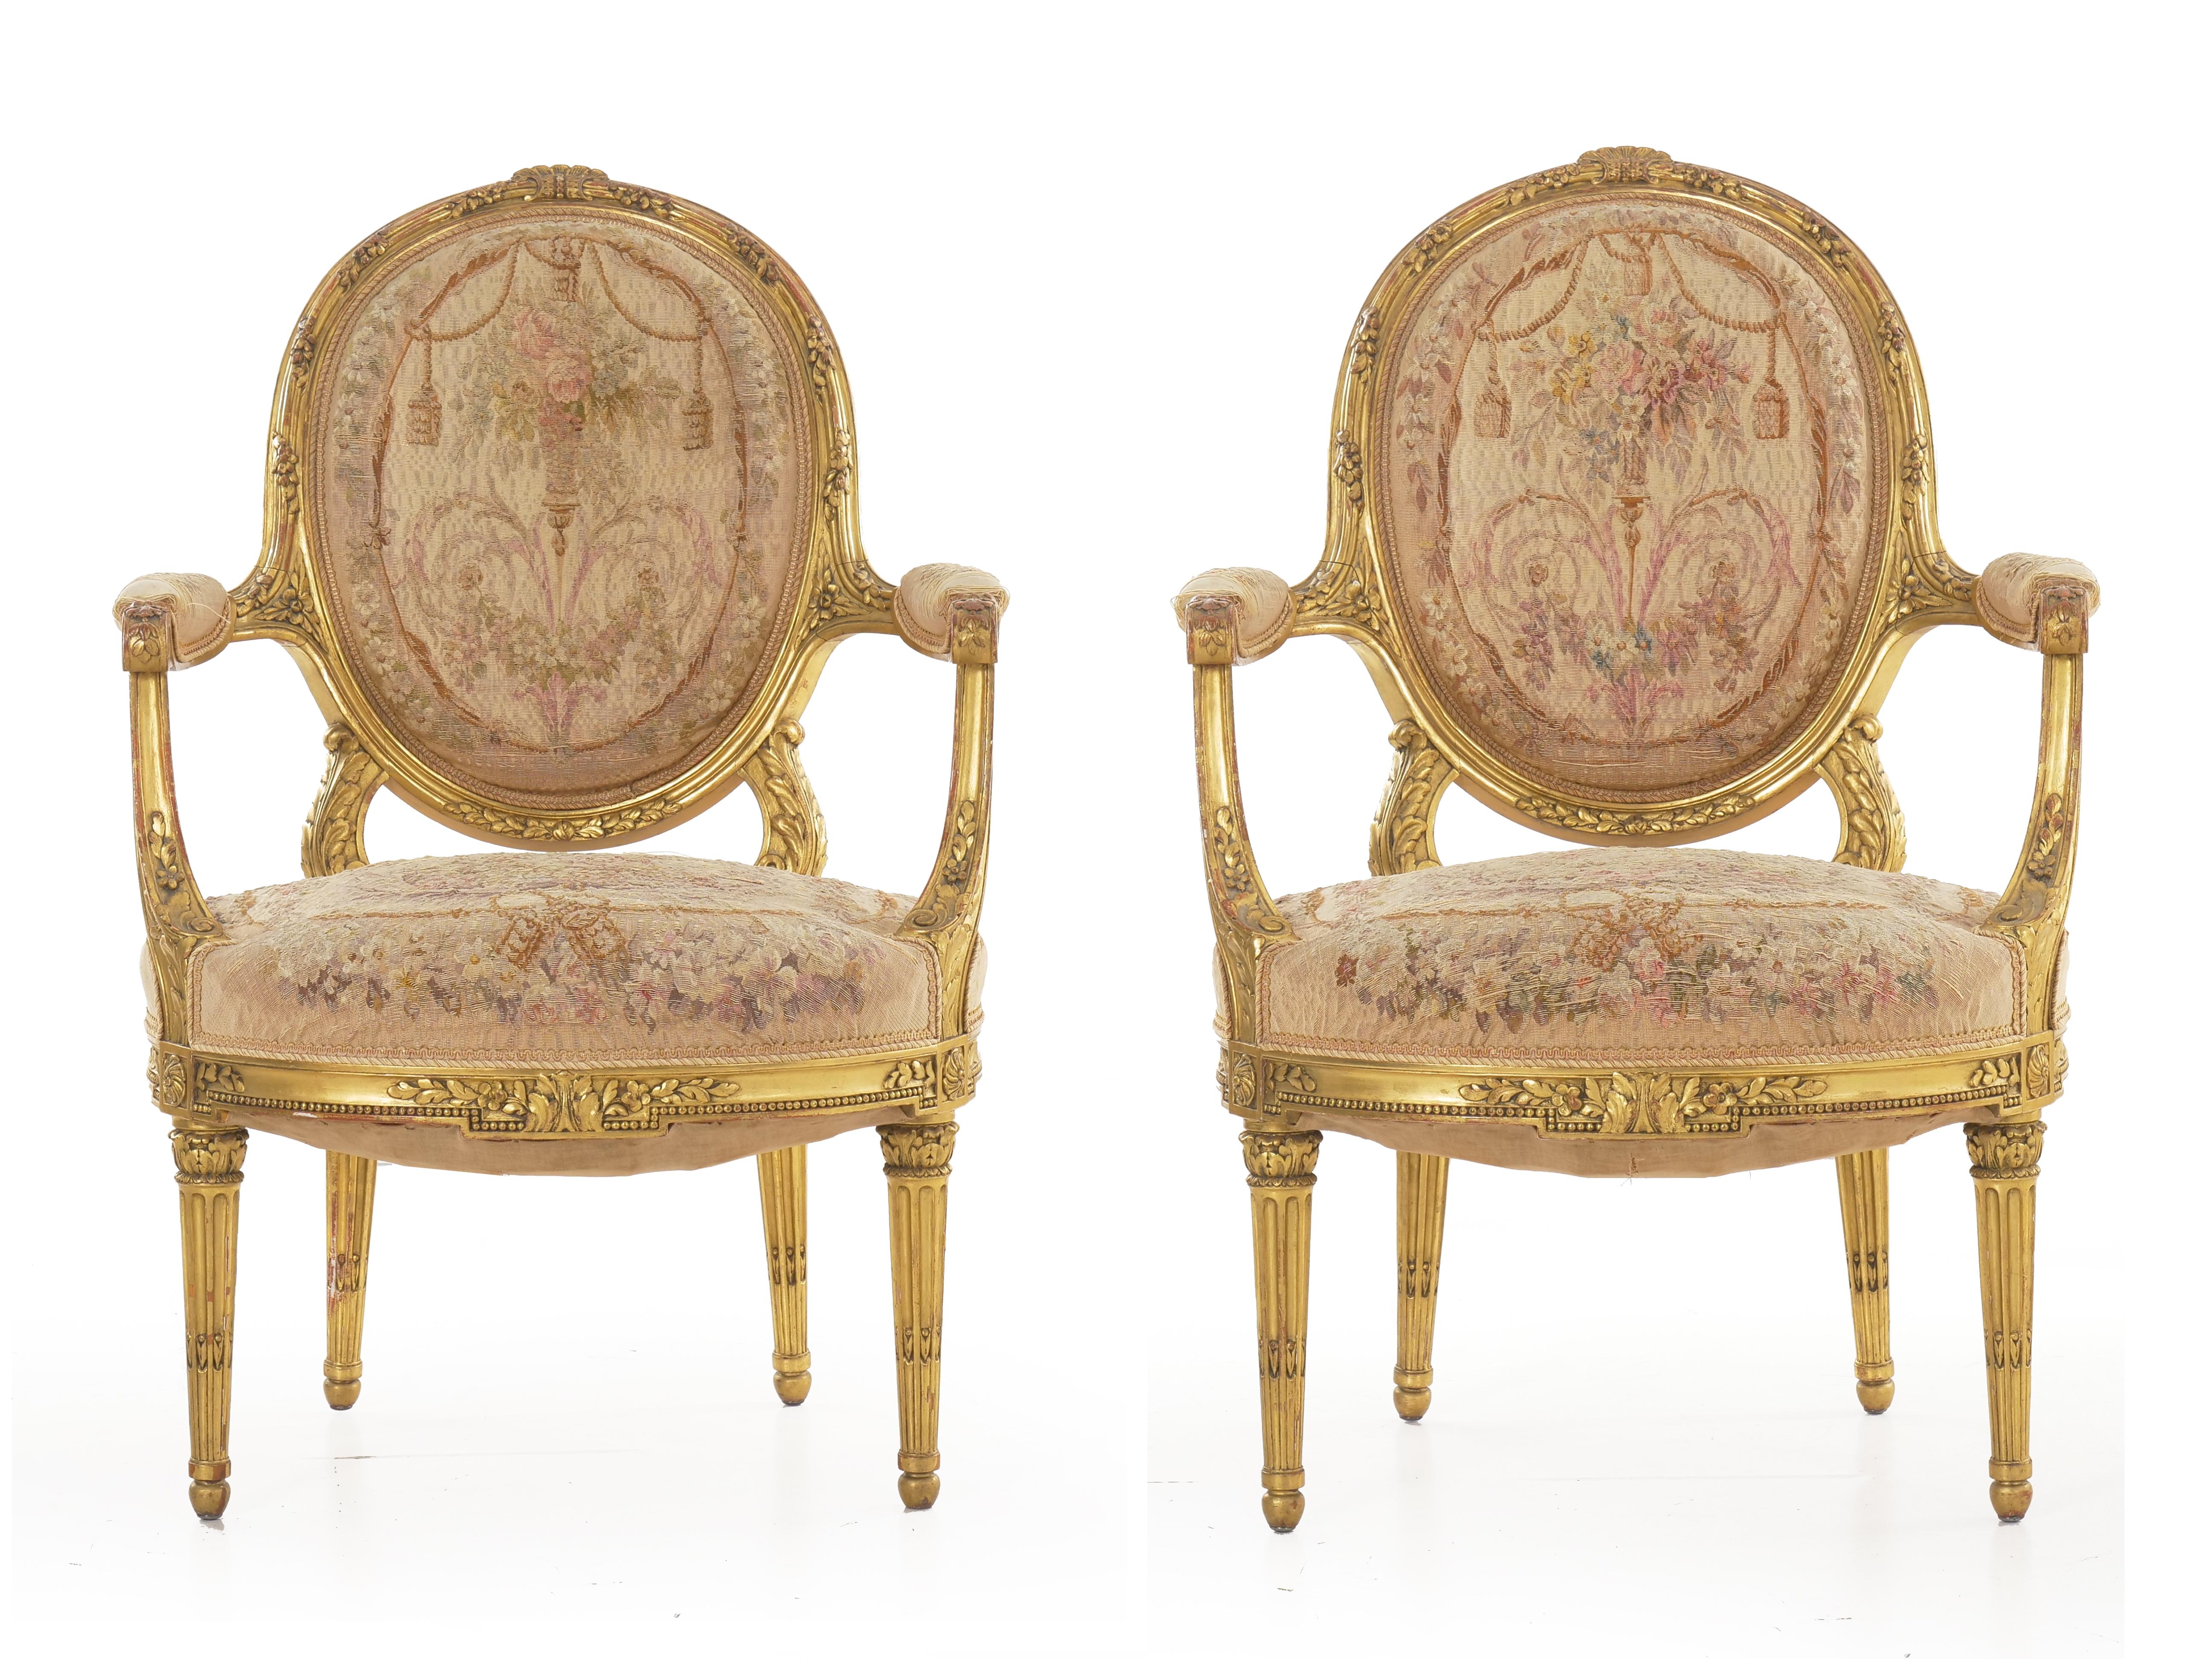 An exquisite pair of giltwood fauteuils designed in the iconic Louis XVI taste, this fine pair of chairs exhibit crisp carved motifs and an attractively worn tapestry upholstery. The rich gilded surfaces remain in overall good condition with a warm